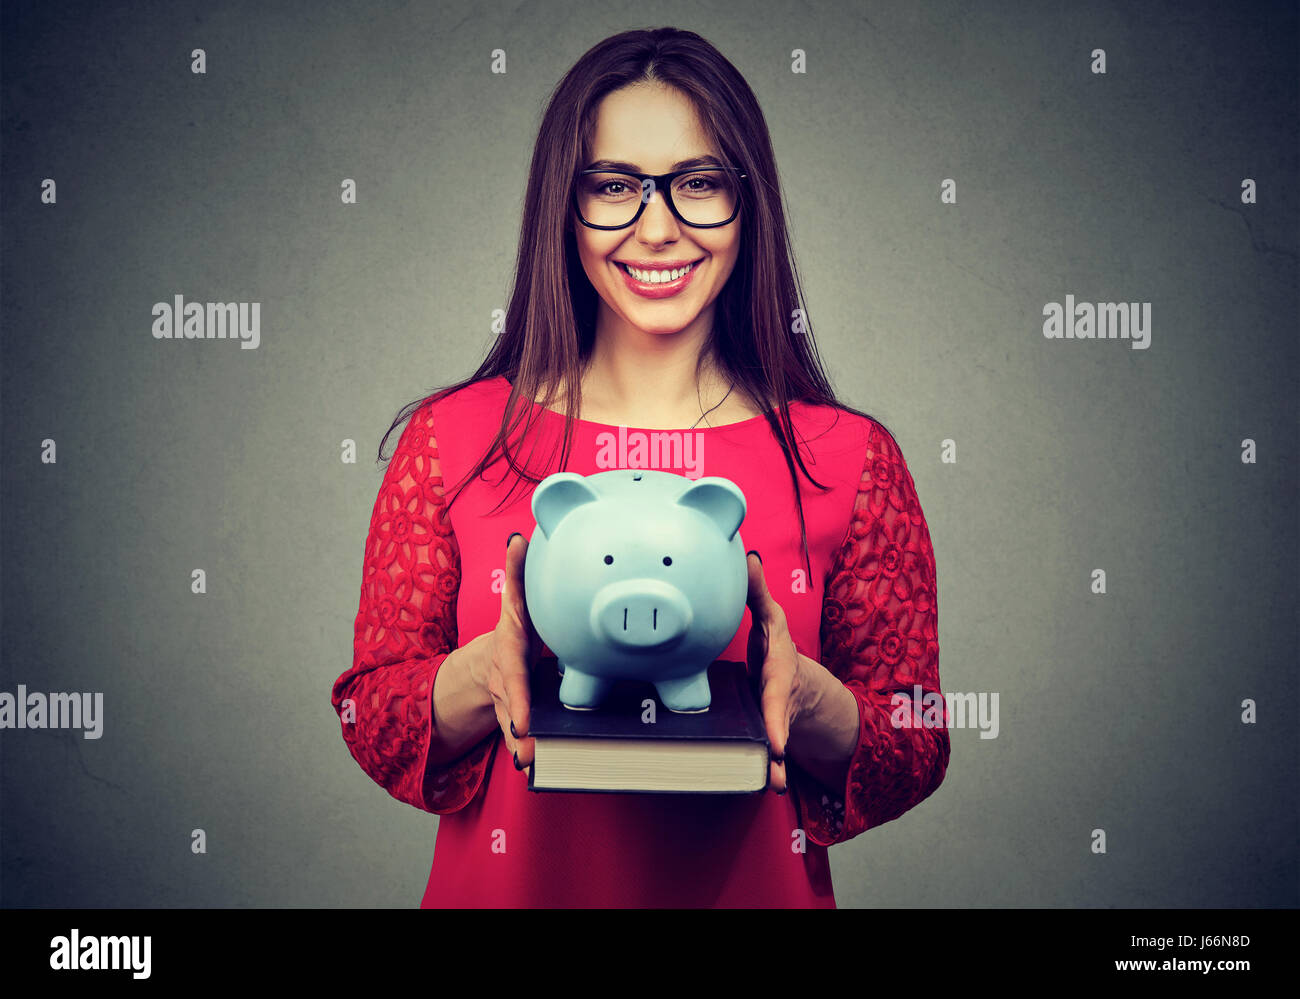 Smiling student, happy woman, holding books and piggy bank in hands. Value of education concept. College fund savings Stock Photo